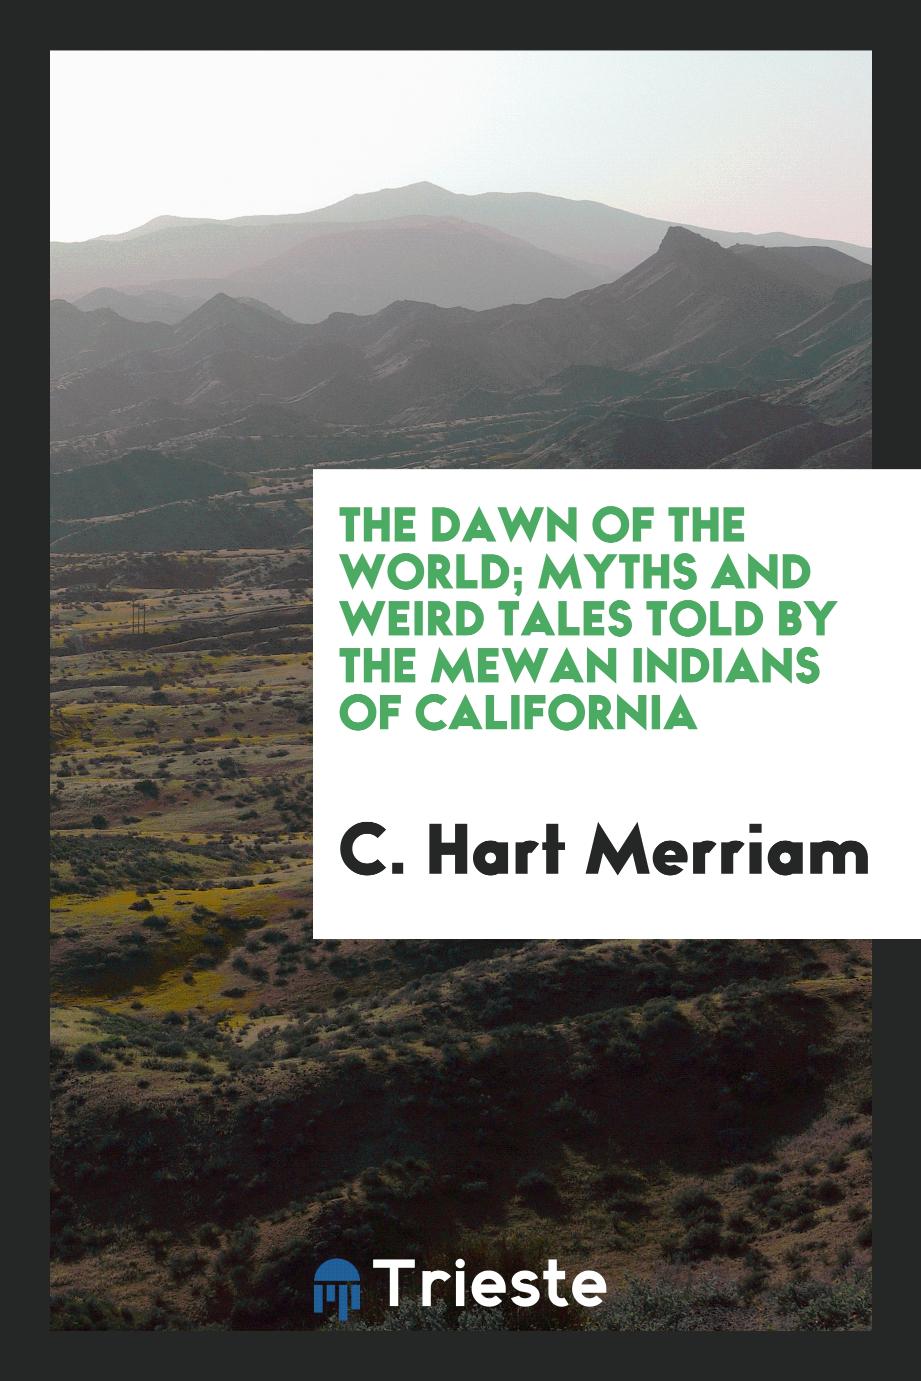 The dawn of the world; myths and weird tales told by the Mewan Indians of California